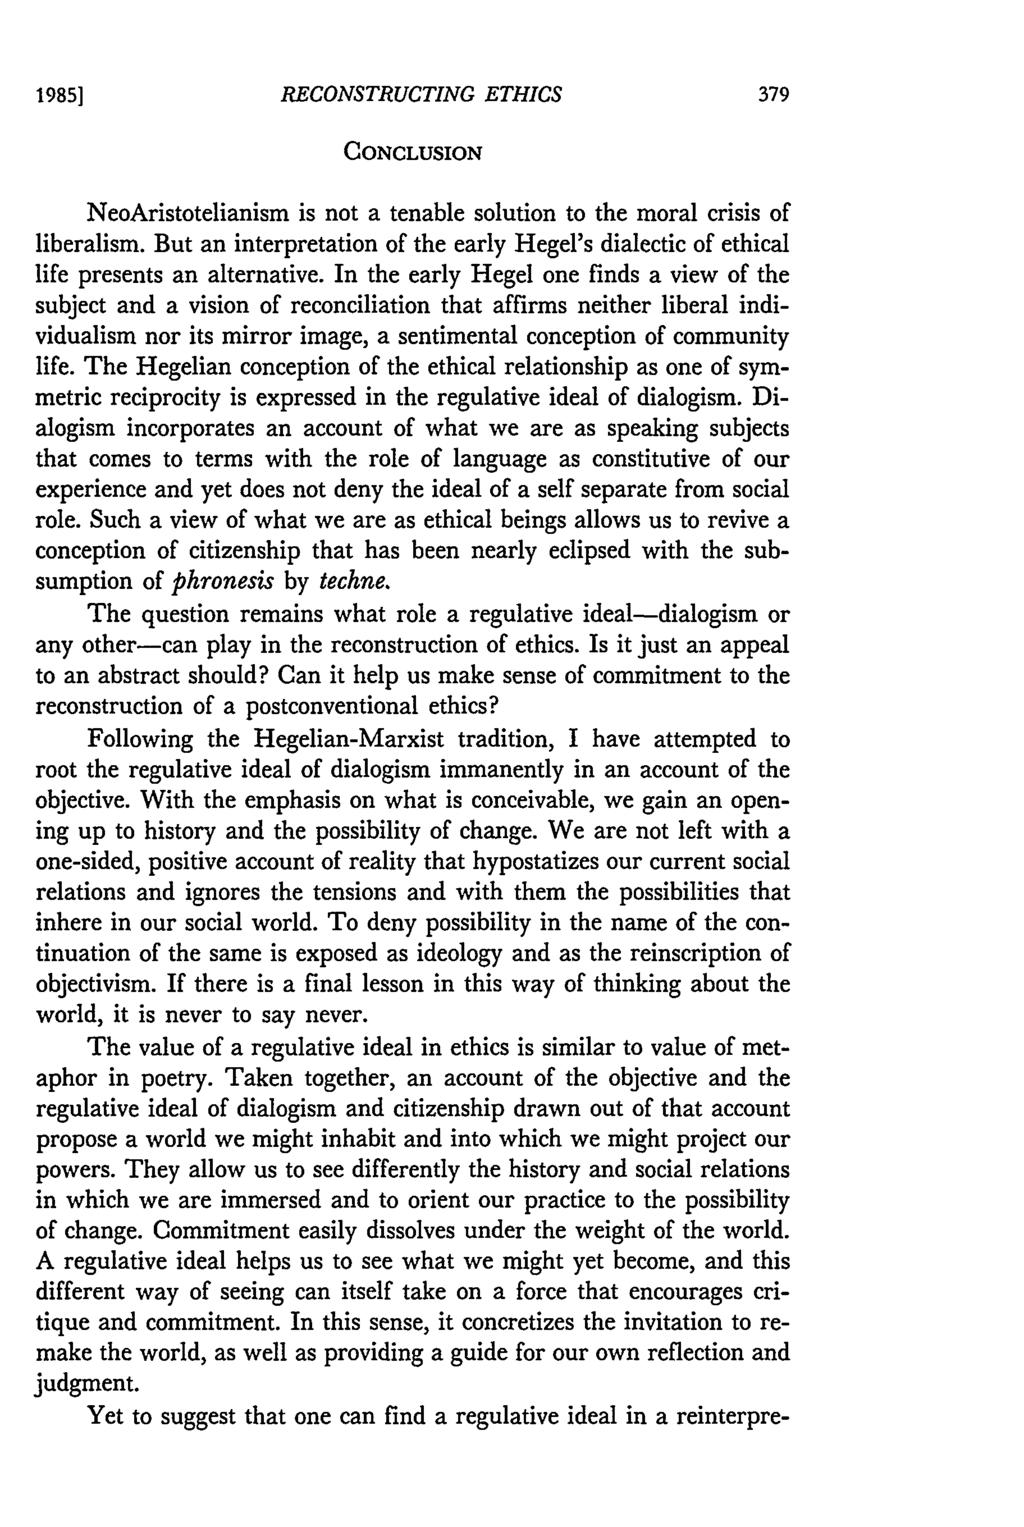 19851 RECONSTRUCTING ETHICS CONCLUSION NeoAristotelianism is not a tenable solution to the moral crisis of liberalism.